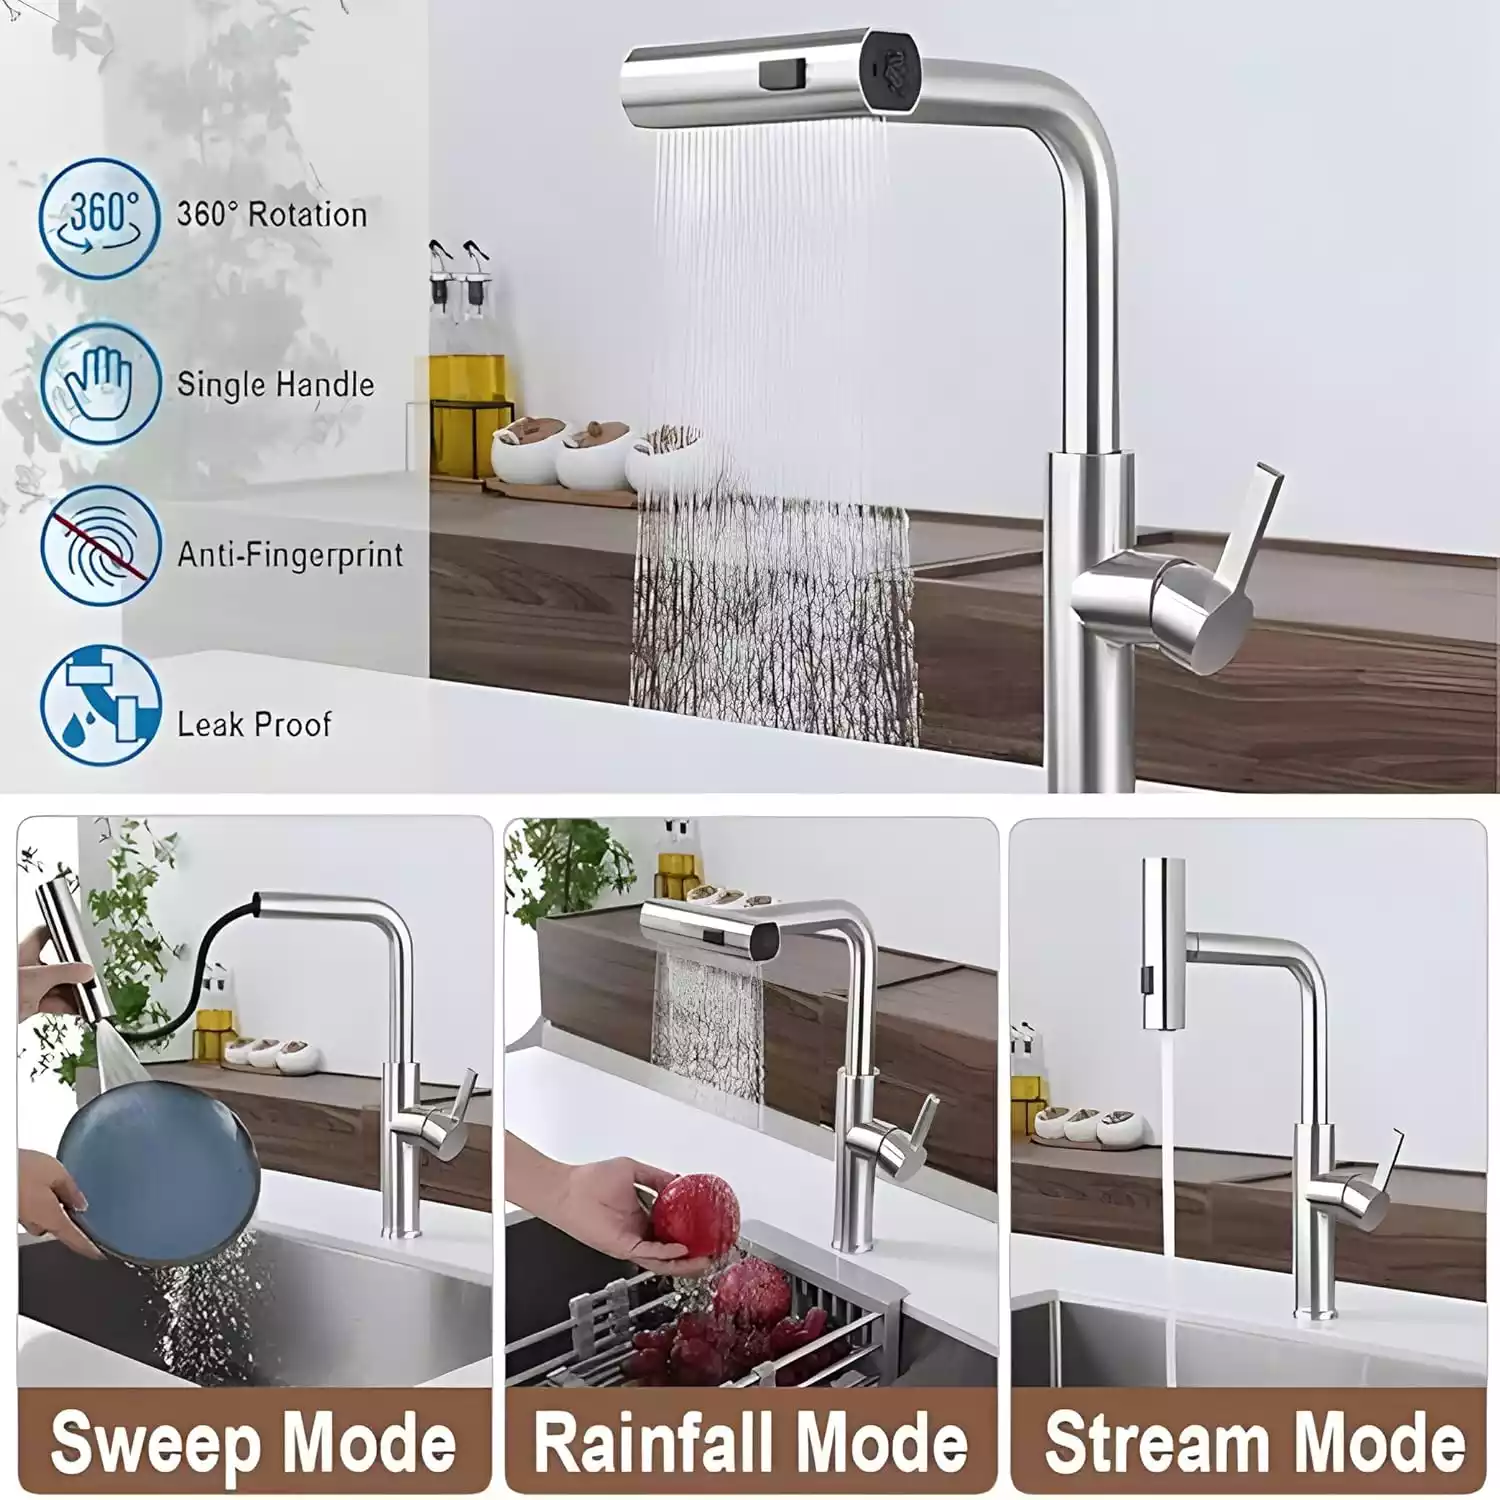 The Lootzoo Waterfall Kitchen Faucet: A Comprehensive Overview